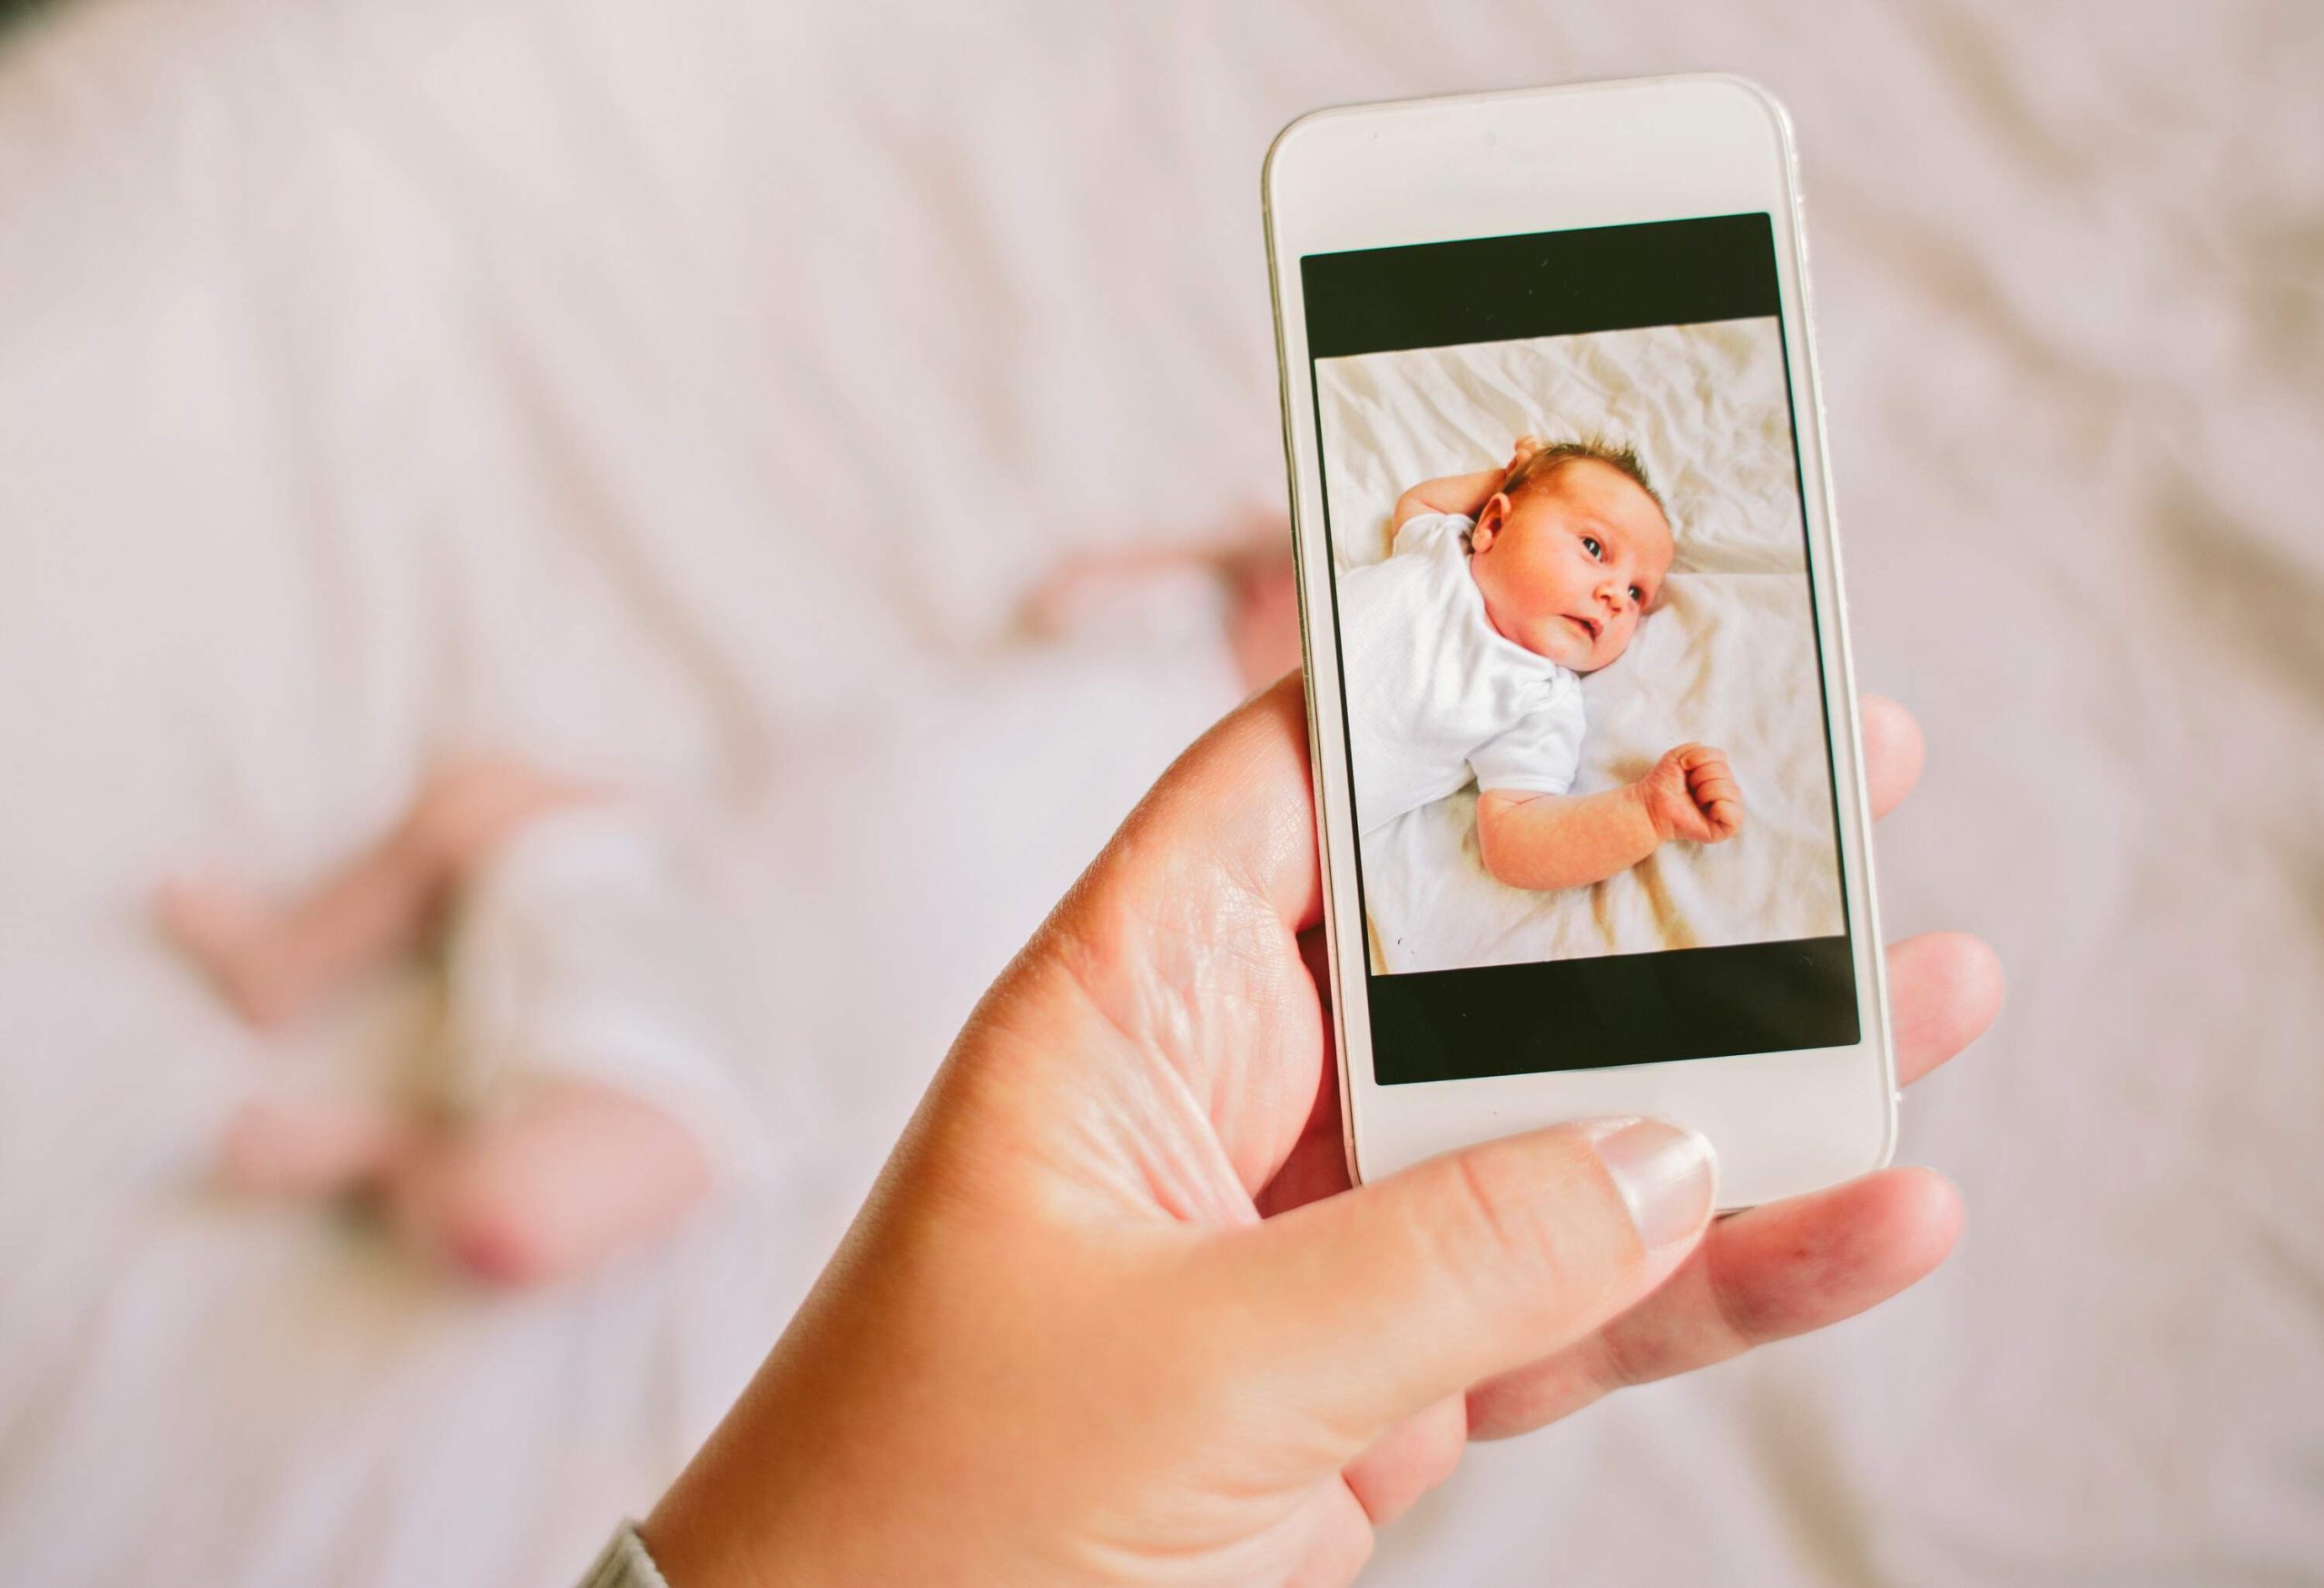 Mother taking a photograph on a smartphone of her newborn baby daughter